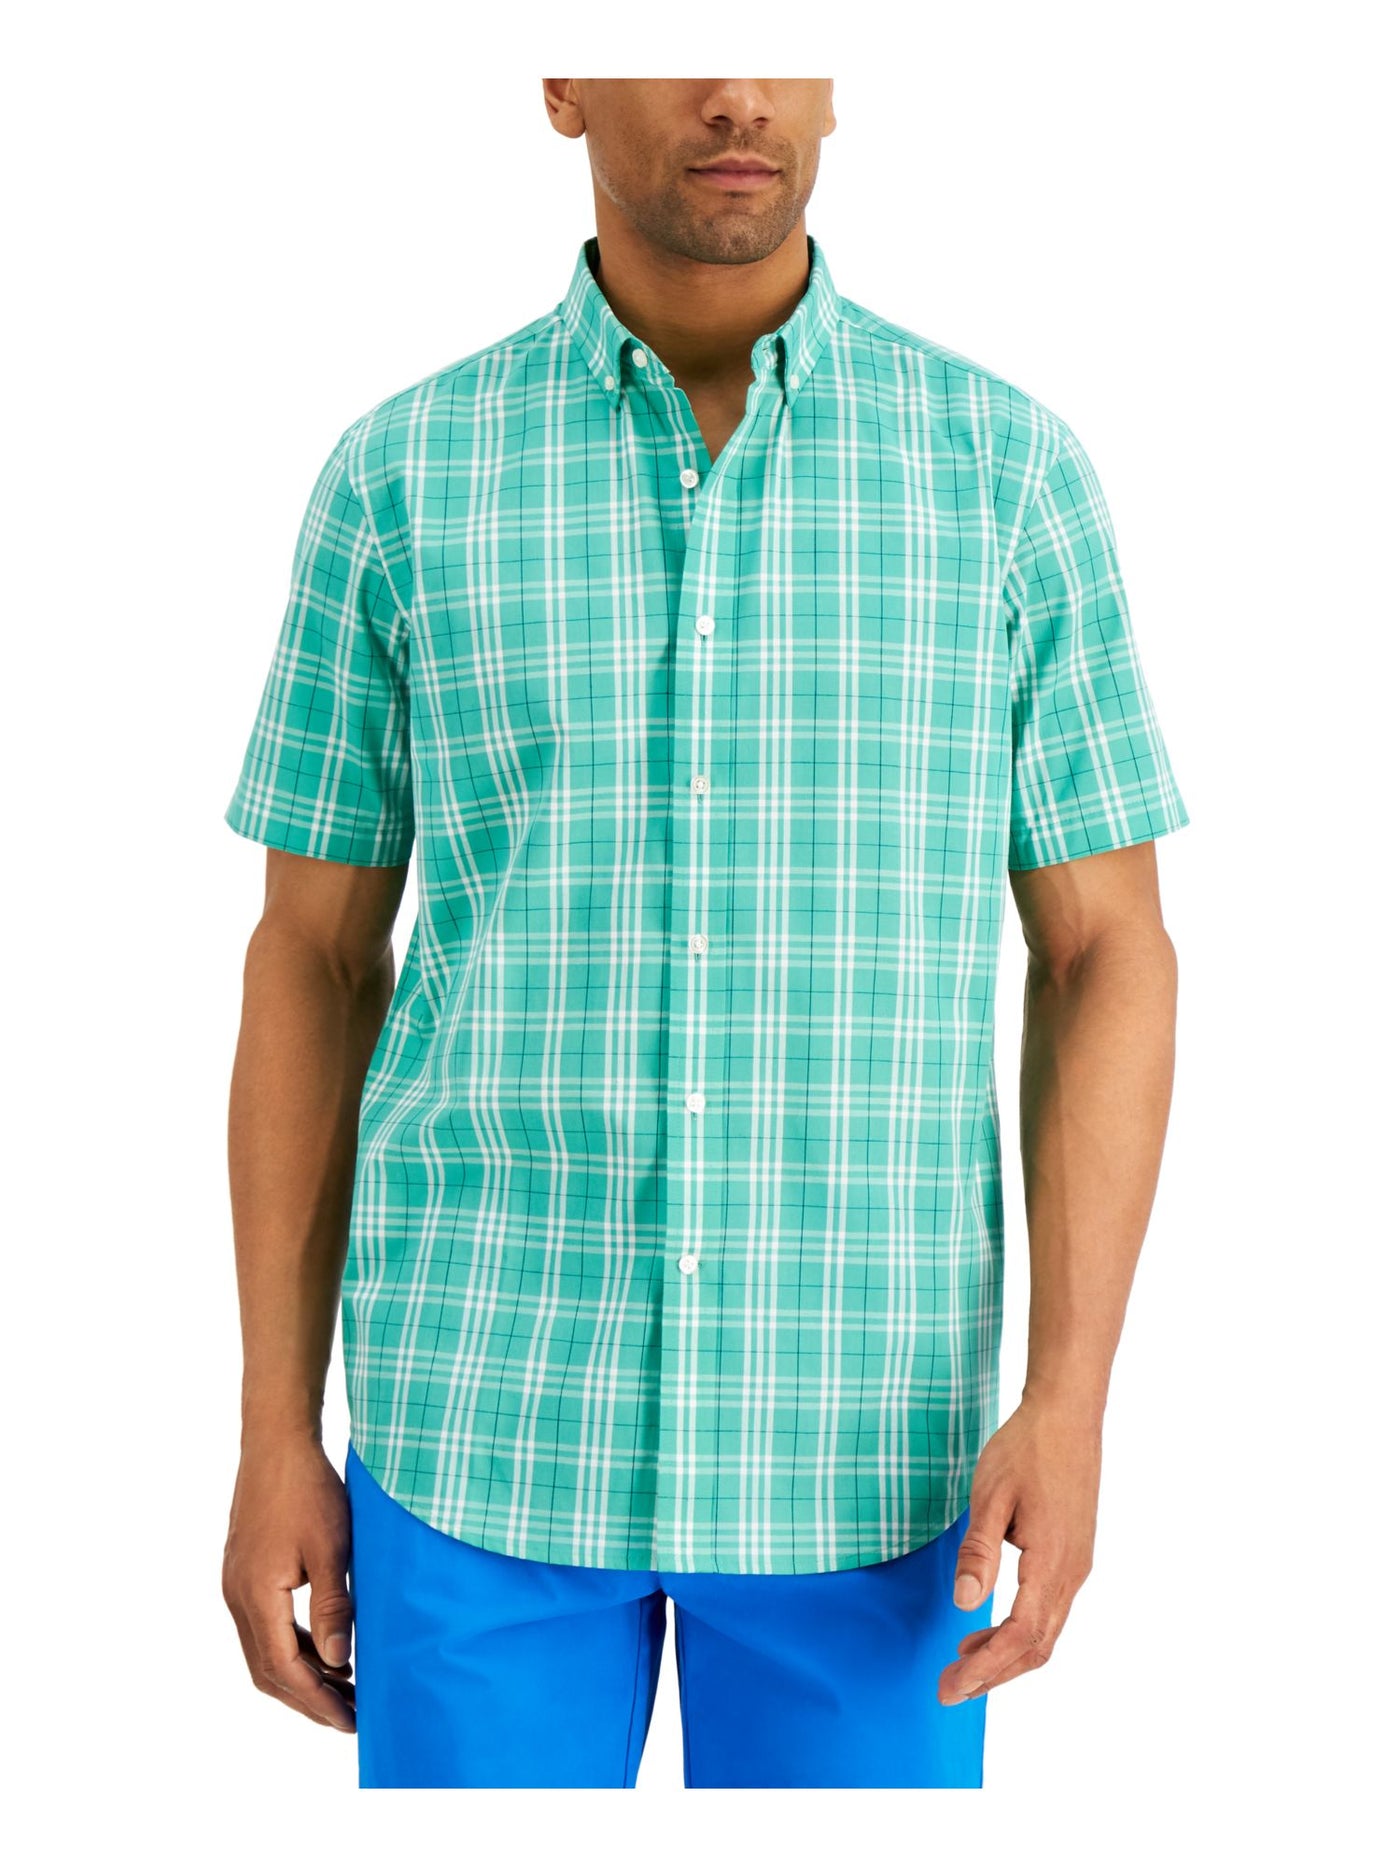 CLUBROOM Mens Green Plaid Short Sleeve Classic Fit Button Down Casual Shirt L